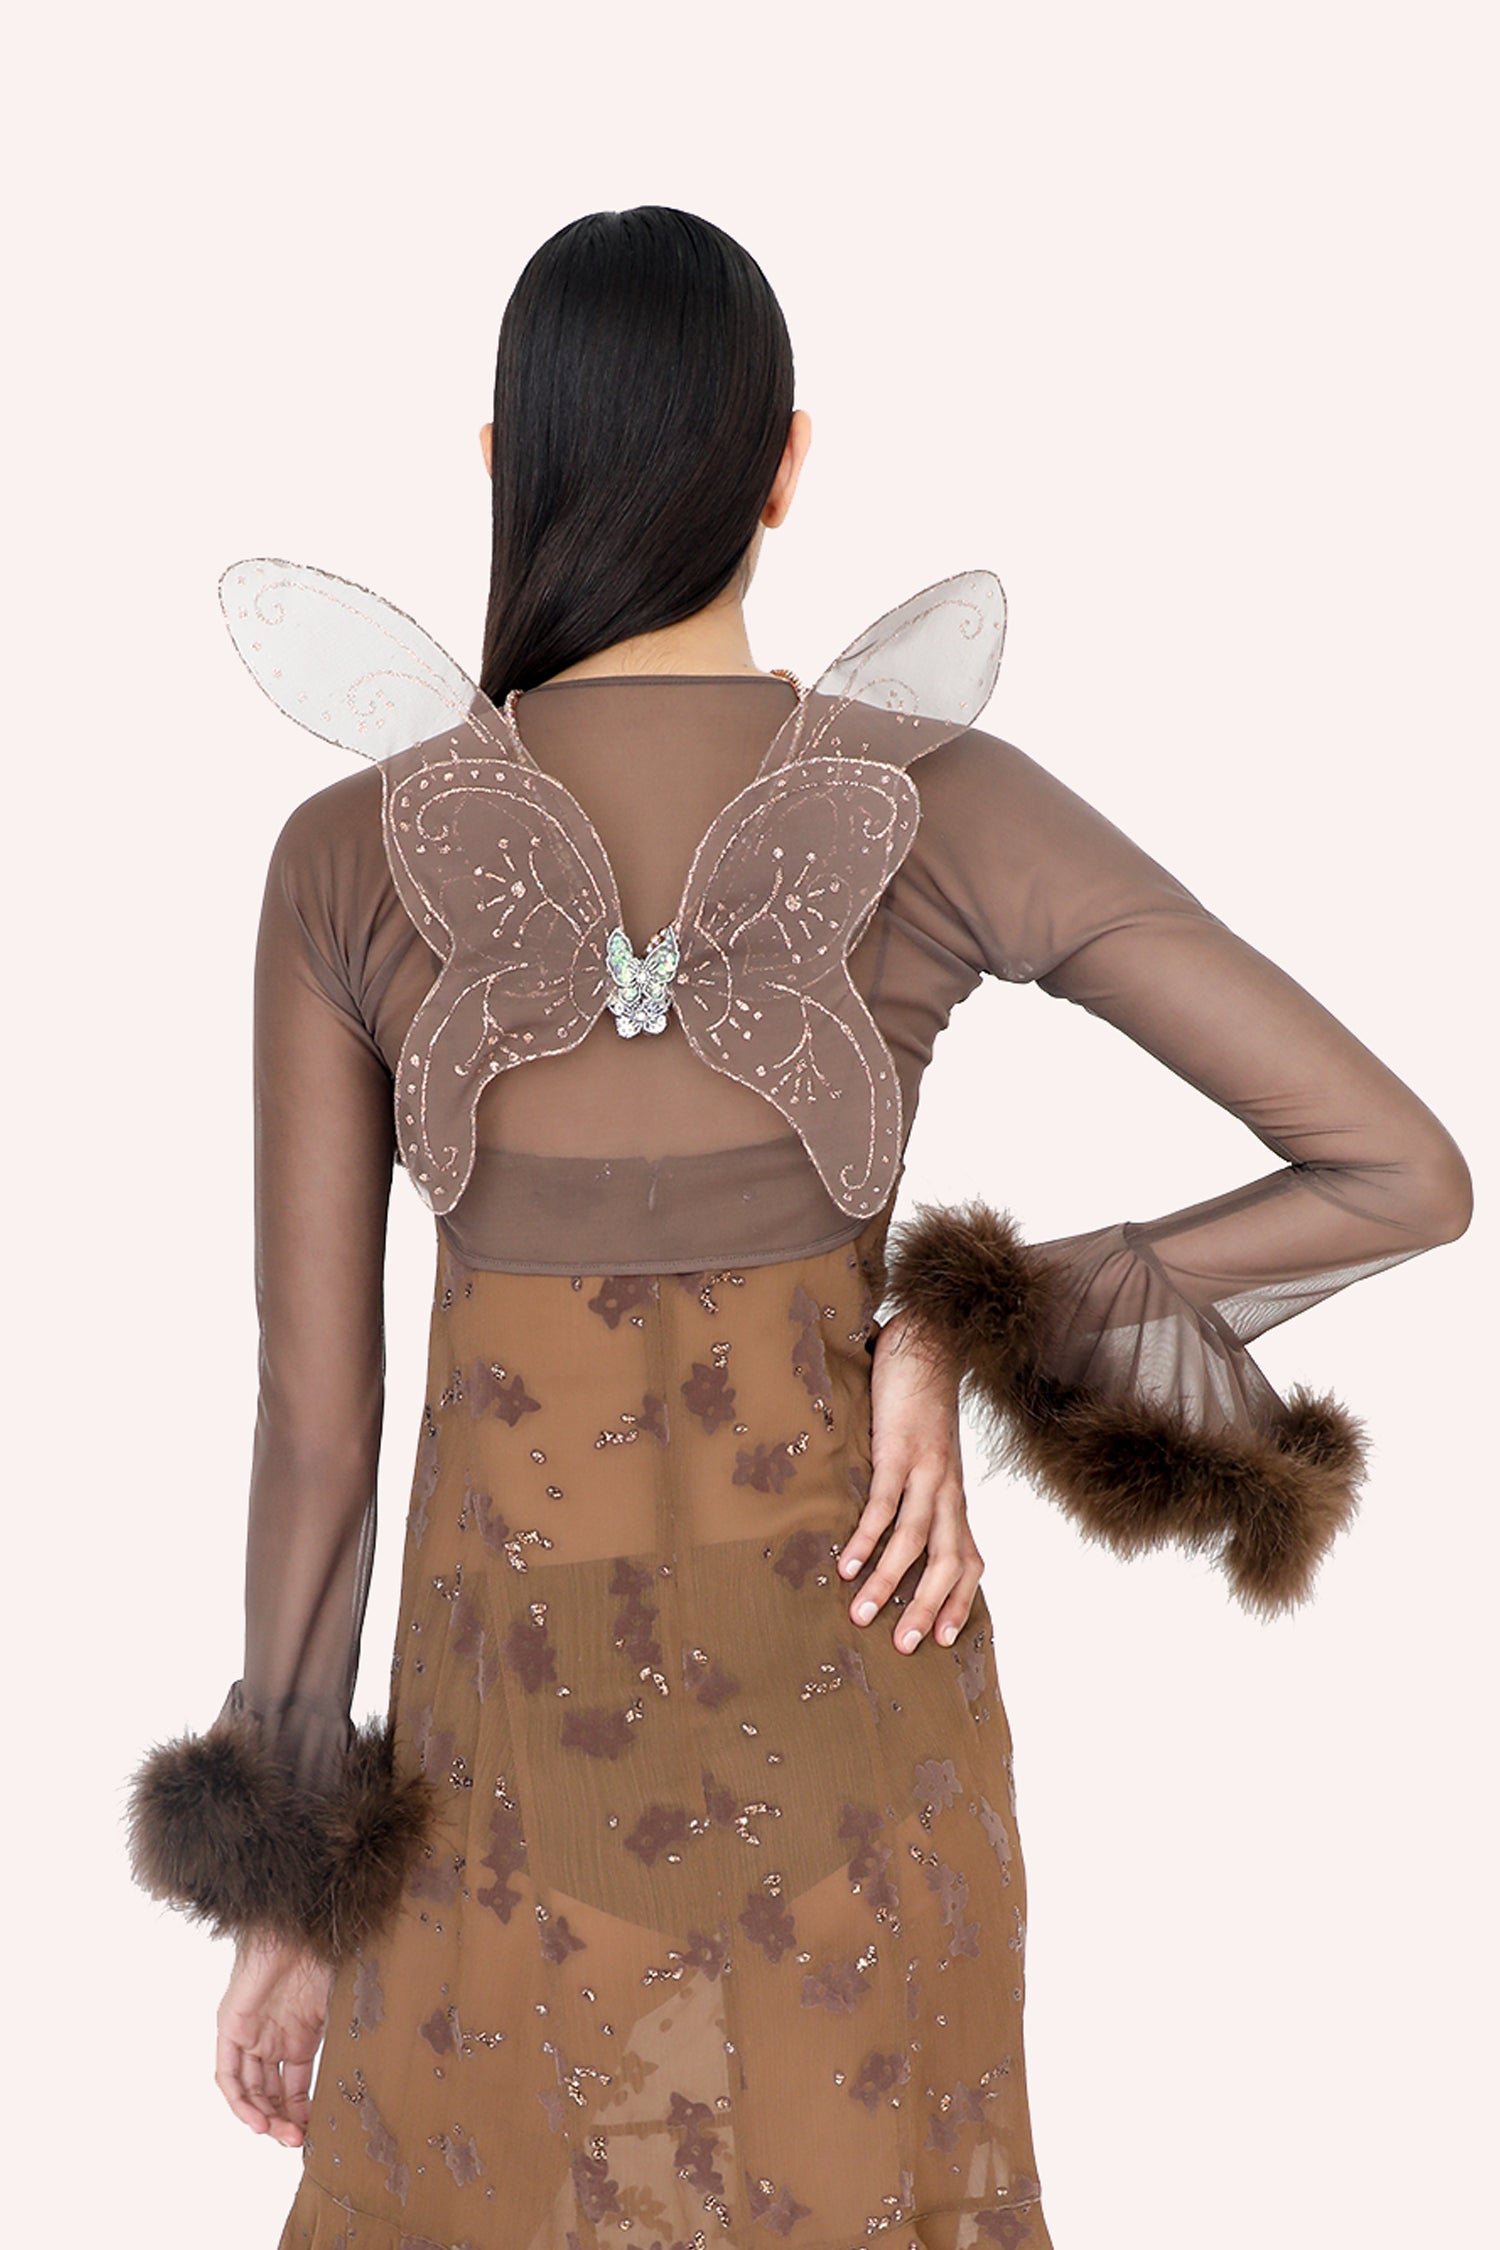 Fairy Wings, Cocoa with golden floral incrustation, slightly above shoulders, to mid back